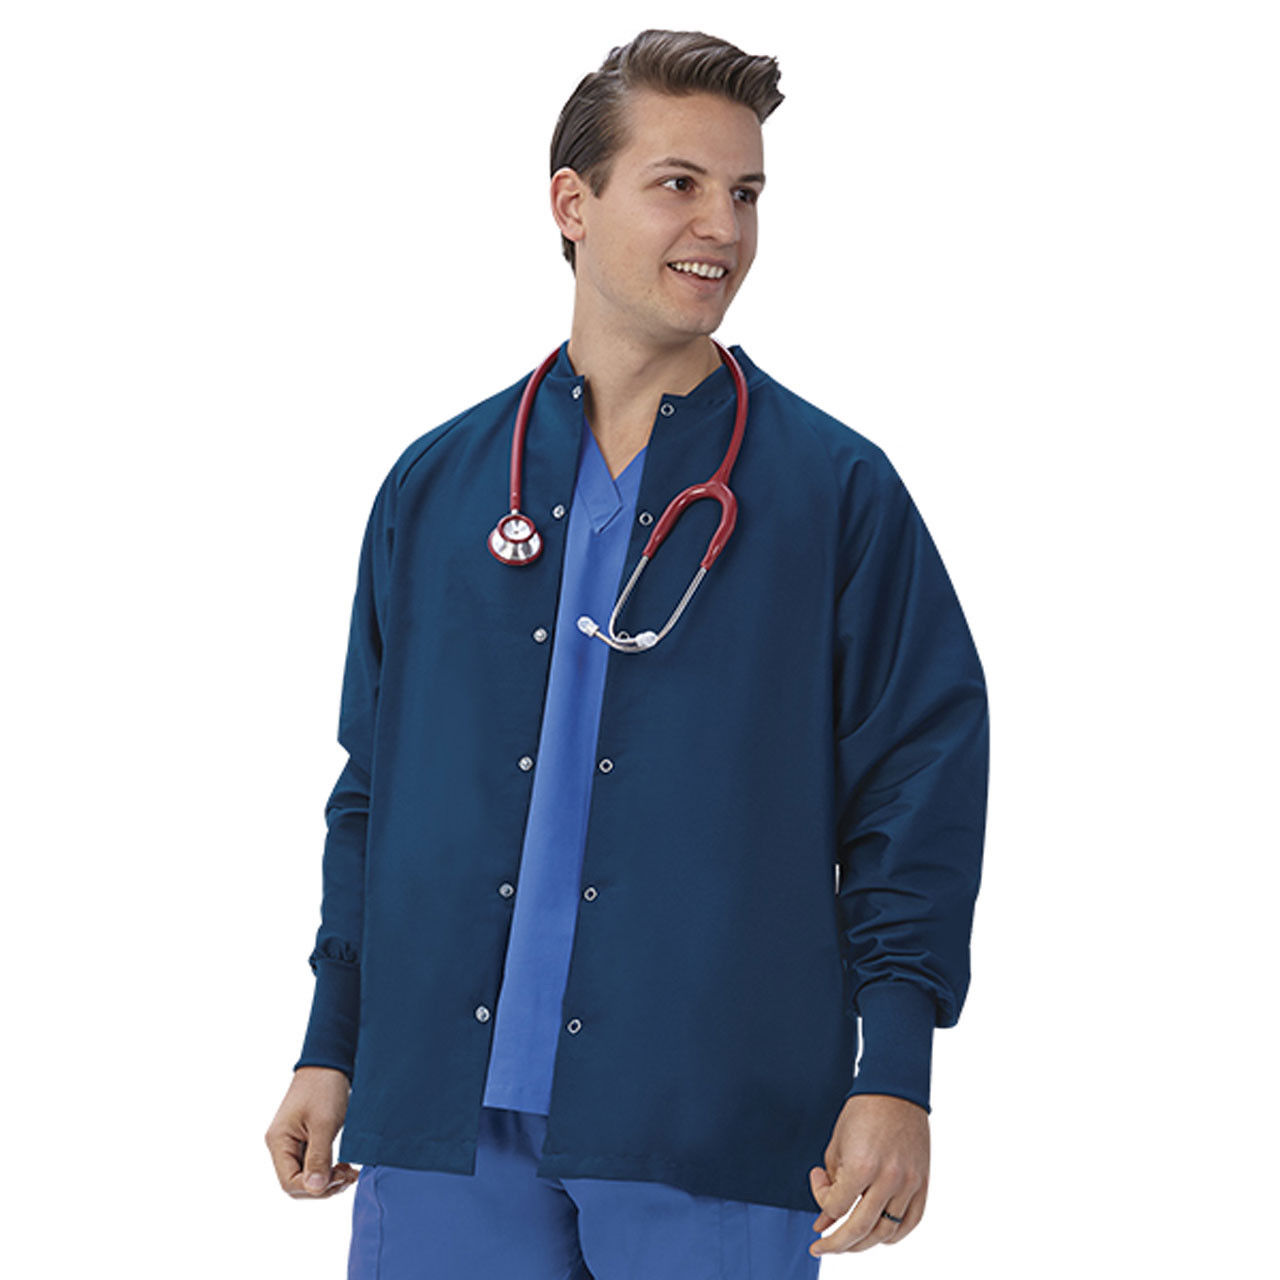 What are the common uses for this scrub warm up jacket?